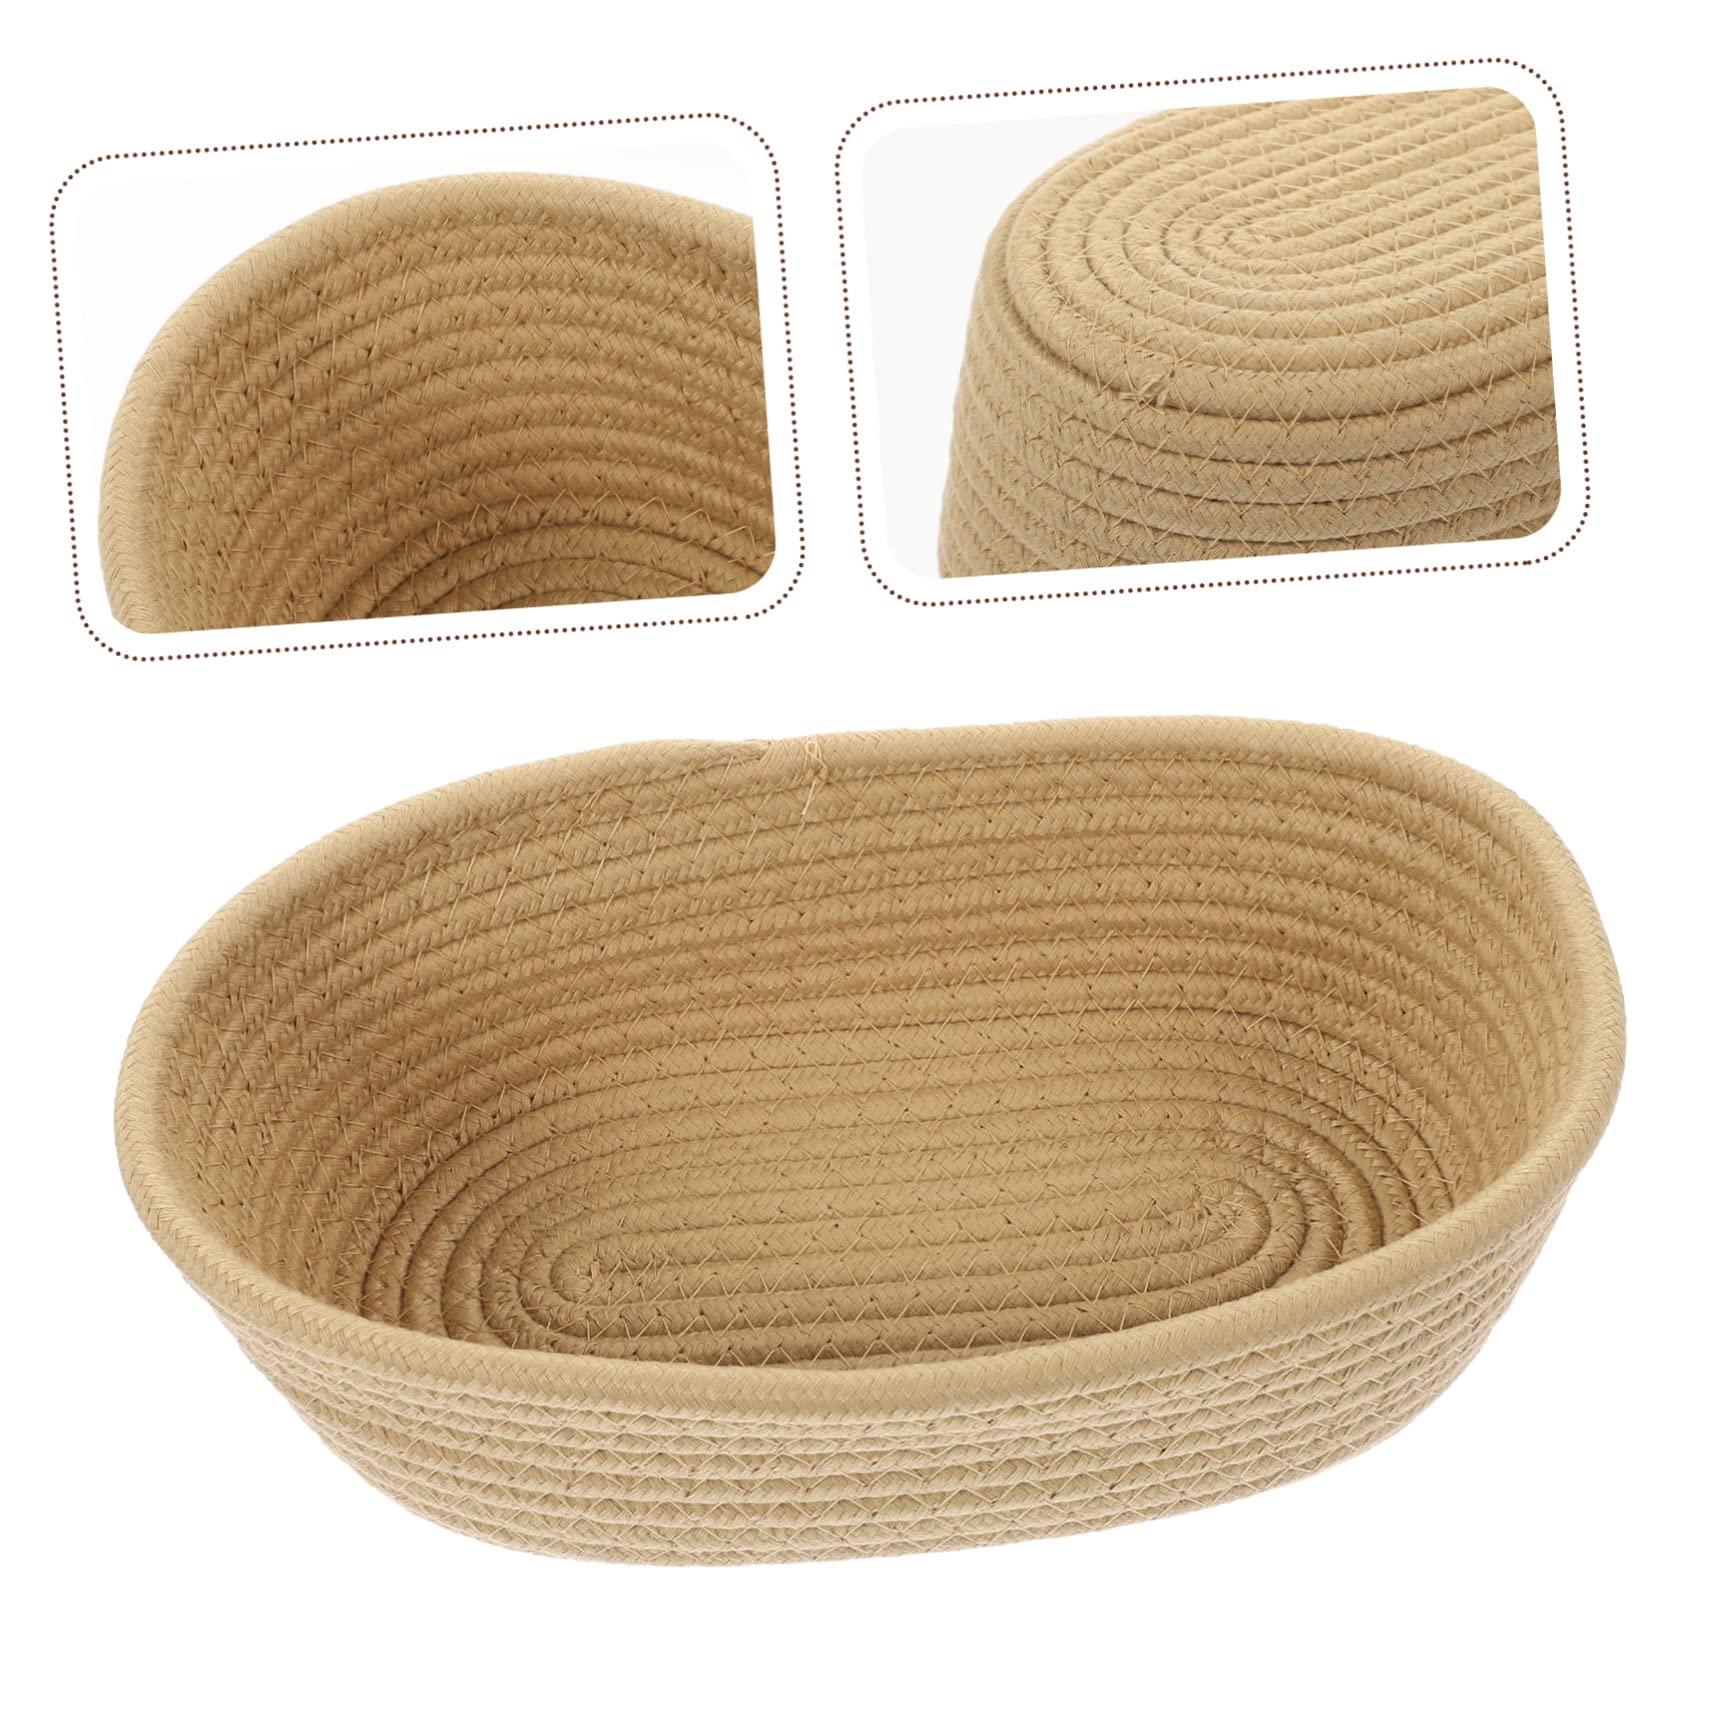 Cabilock Rope Cotton Basket, Small Woven Storage Bins, Khaki Color, 150 Special Features